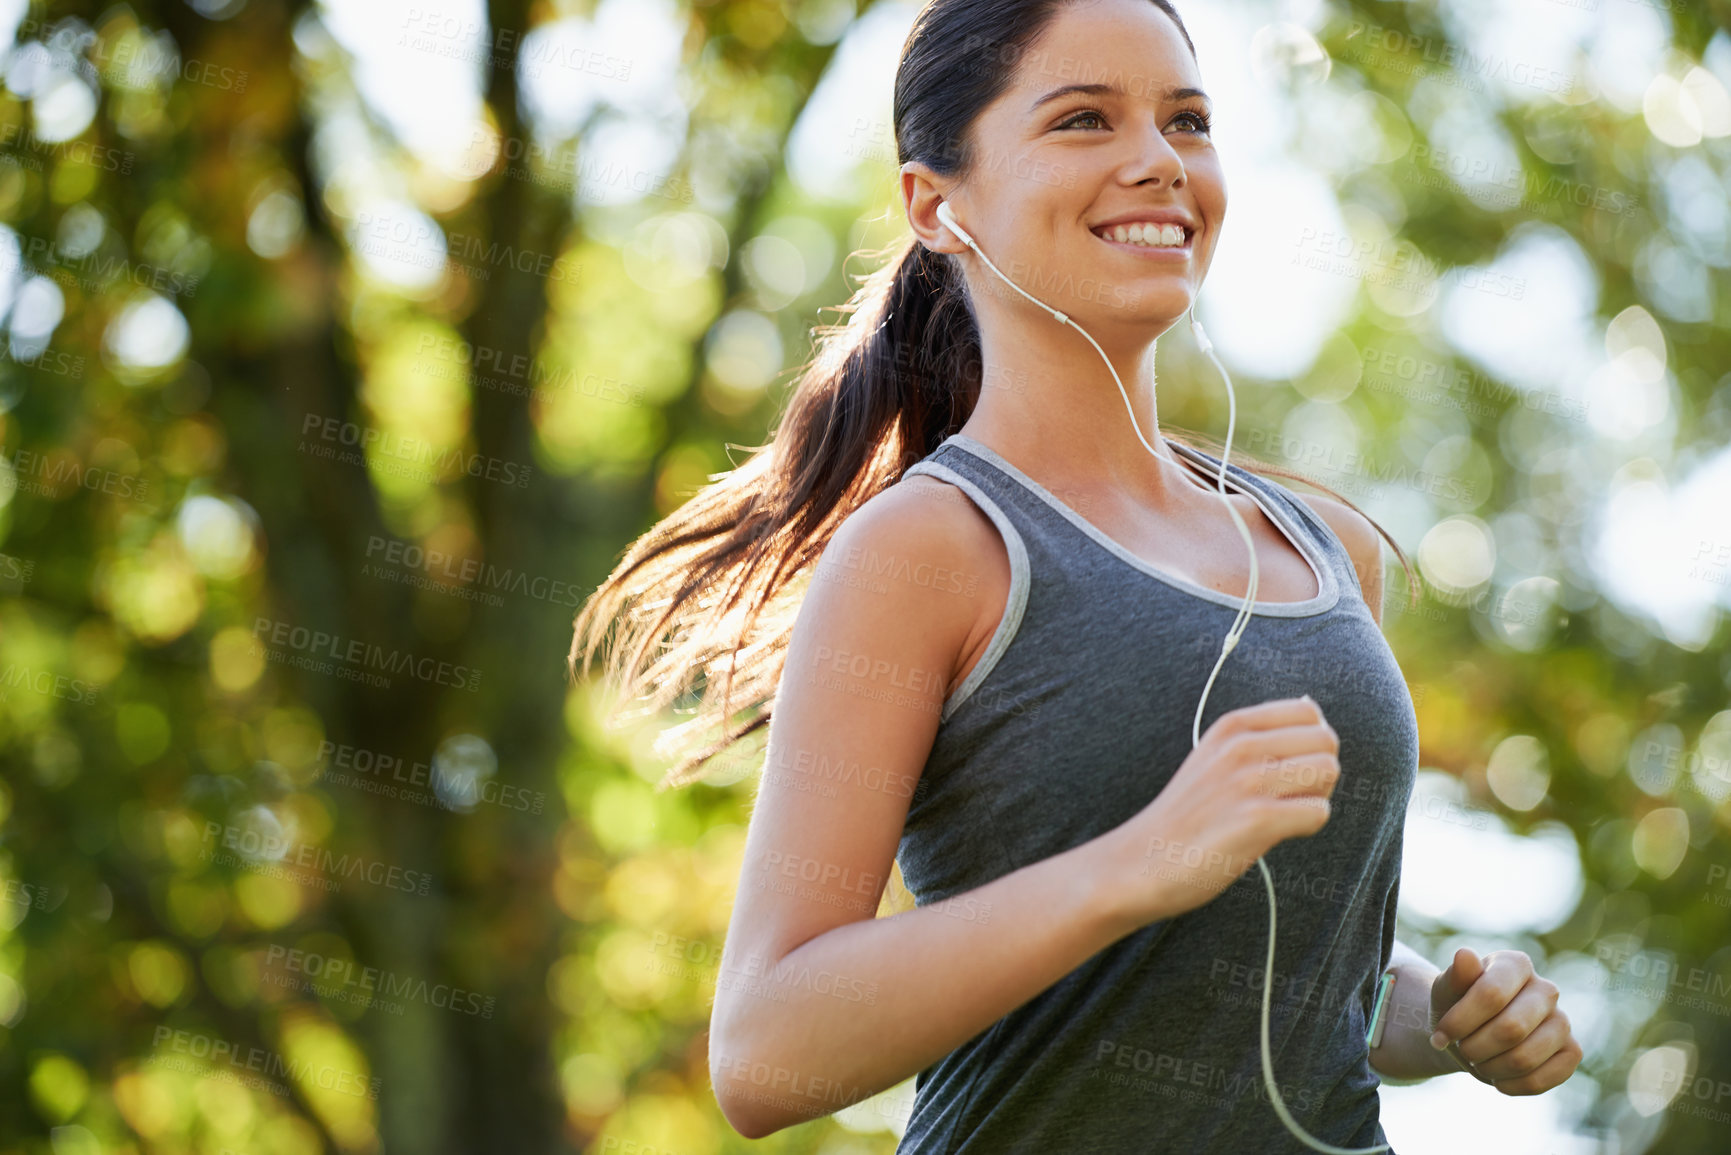 Buy stock photo Fitness, earphones and woman running in a park for health, wellness and outdoor exercise. Nature, sports and female athlete runner doing cardio workout in garden while listening to music and training